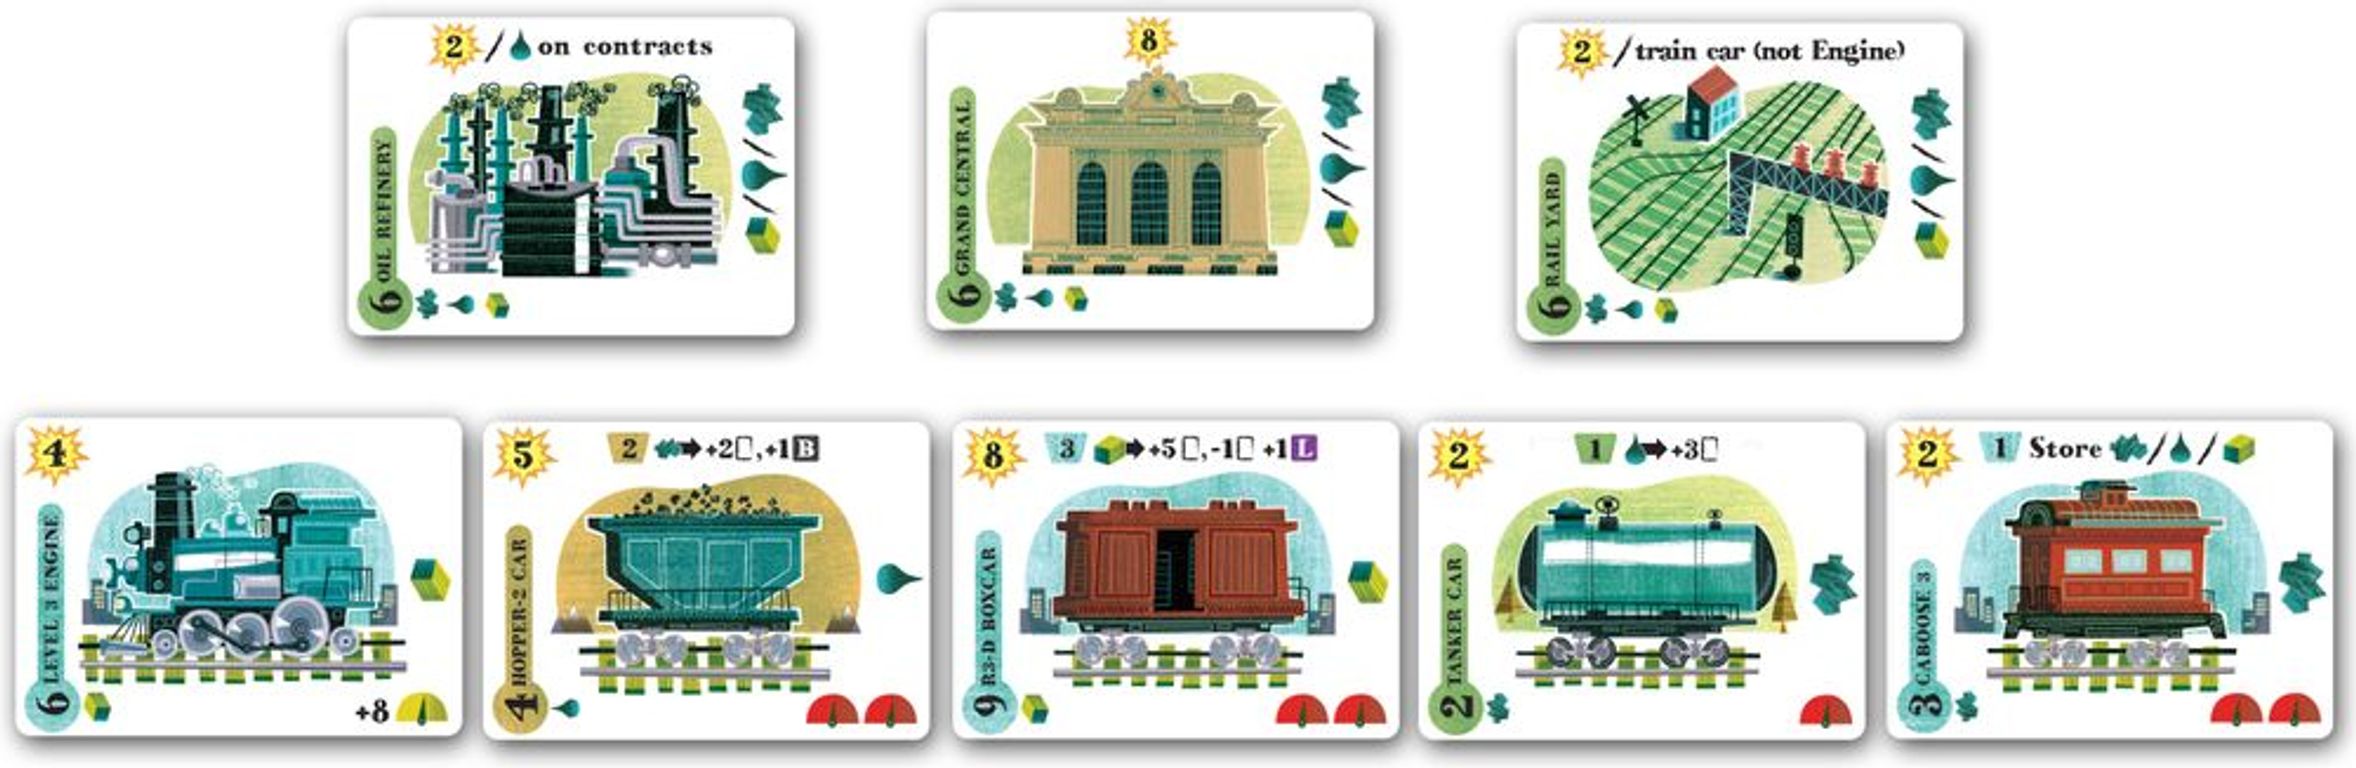 Isle of Trains cards